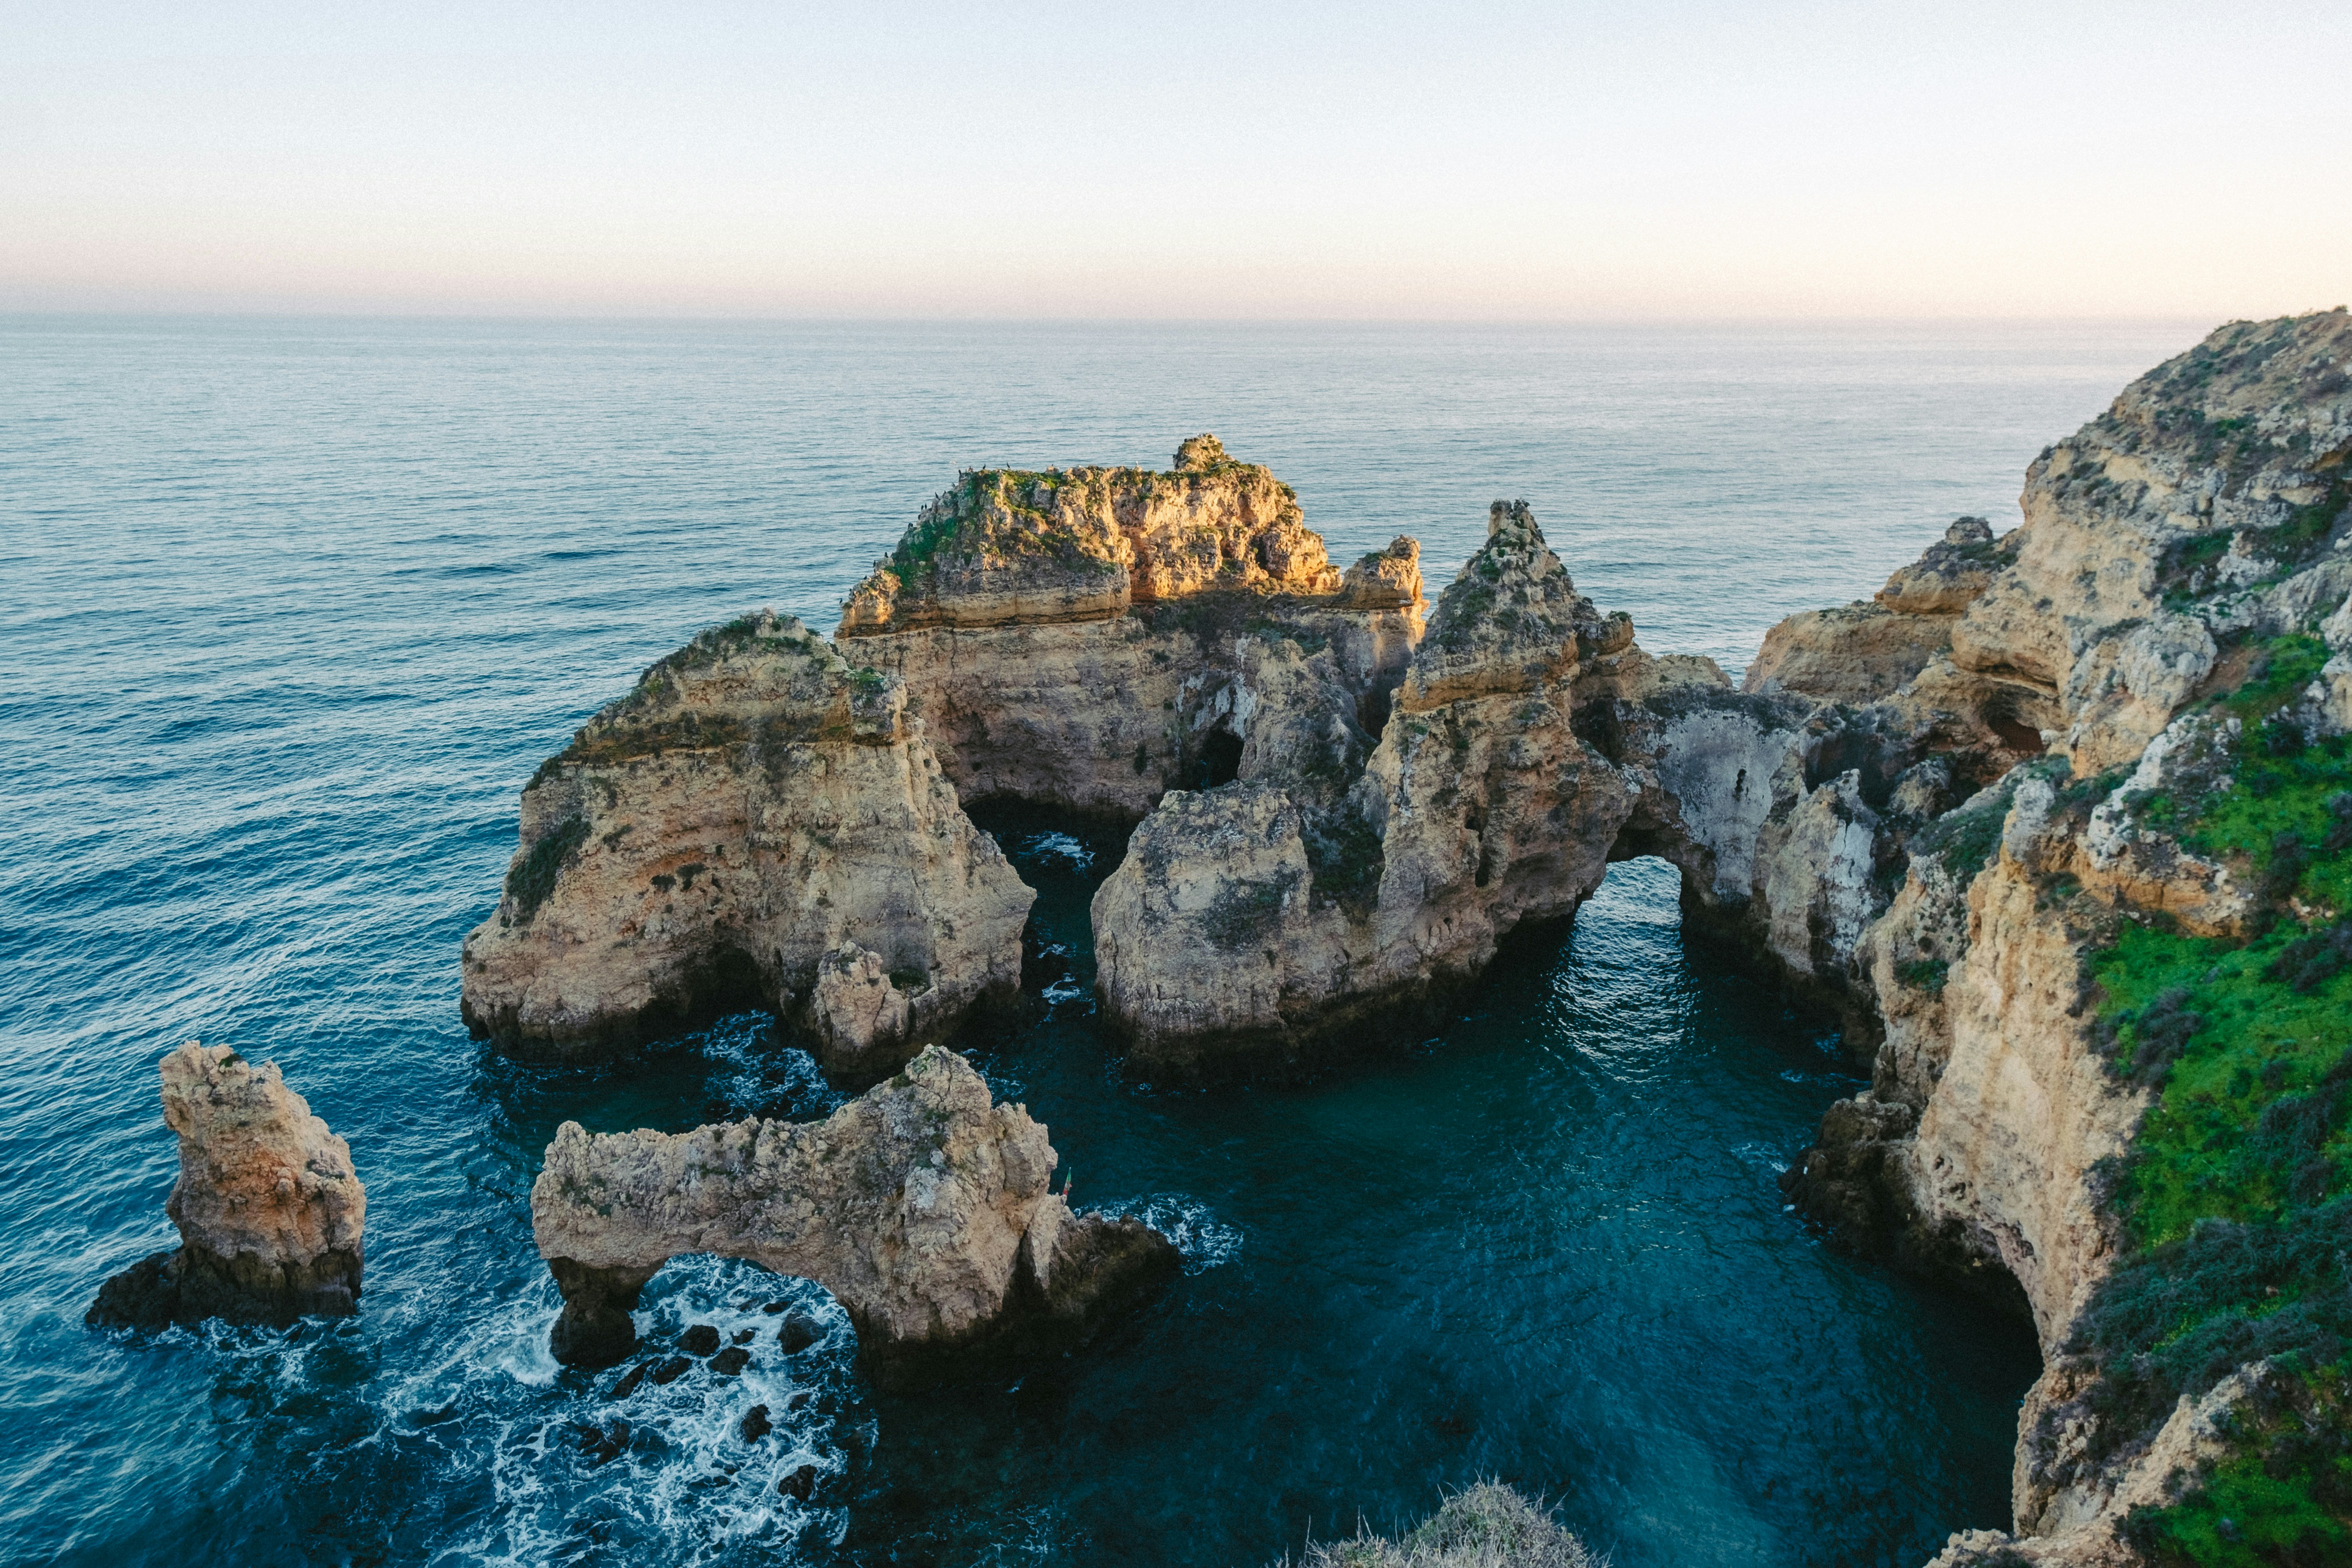 The weathered, eroded cliffs at Ponta da Piedade. Waves crash and froth around the rock stacks.